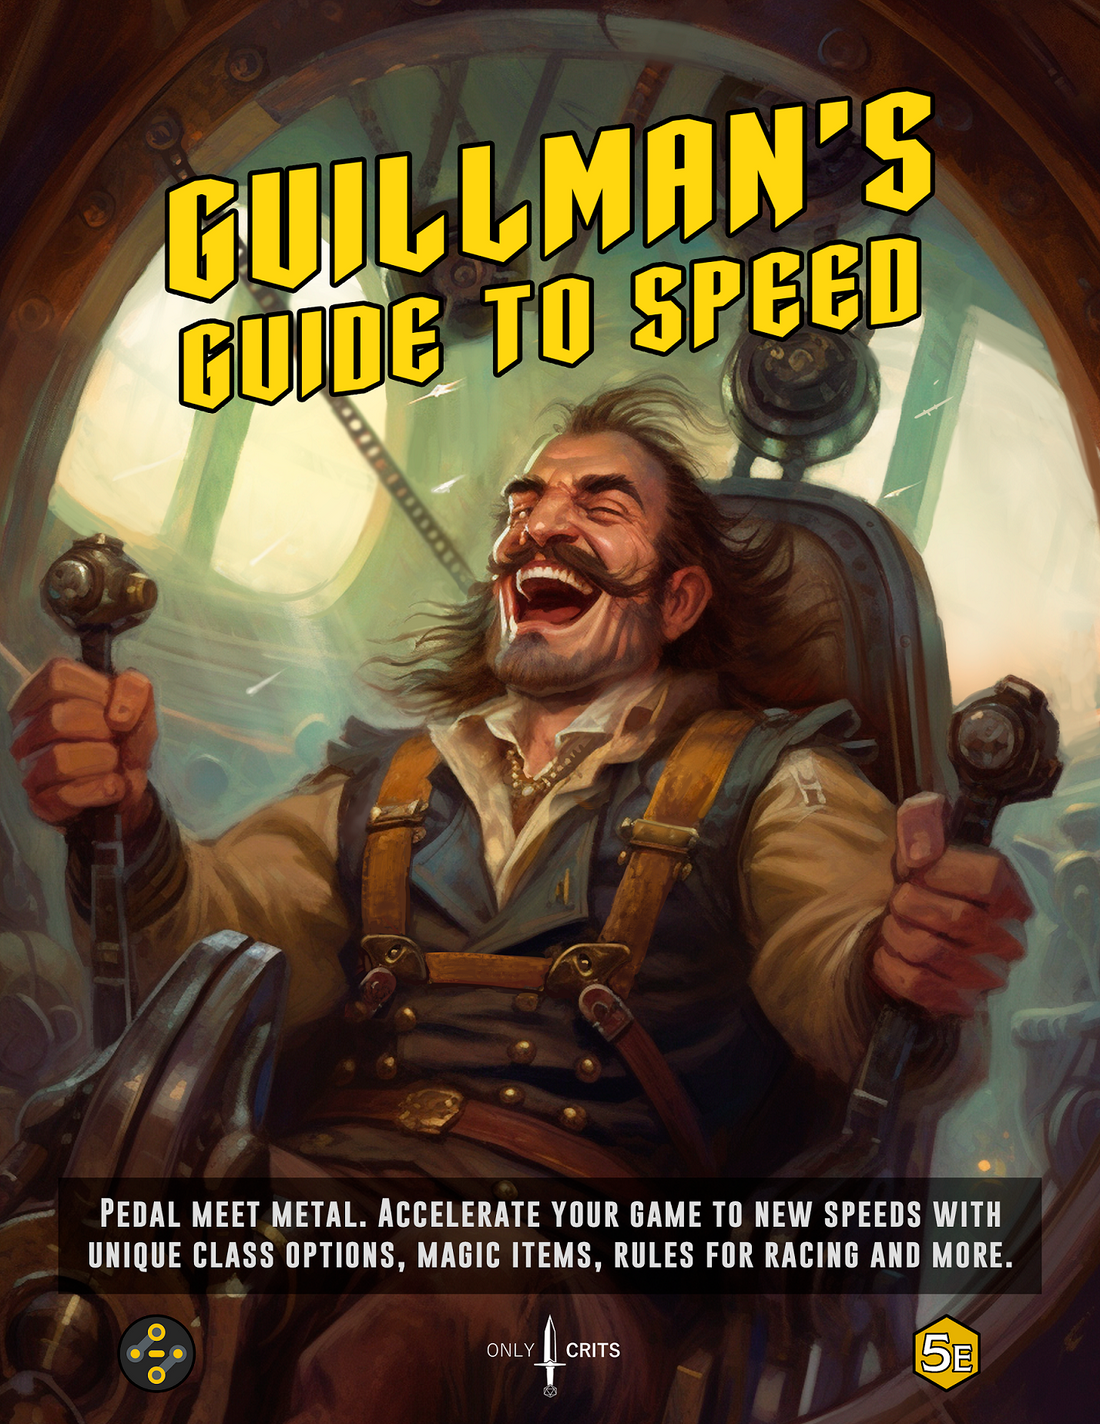 Speed in DnD: An underutilized mechanic and our solution